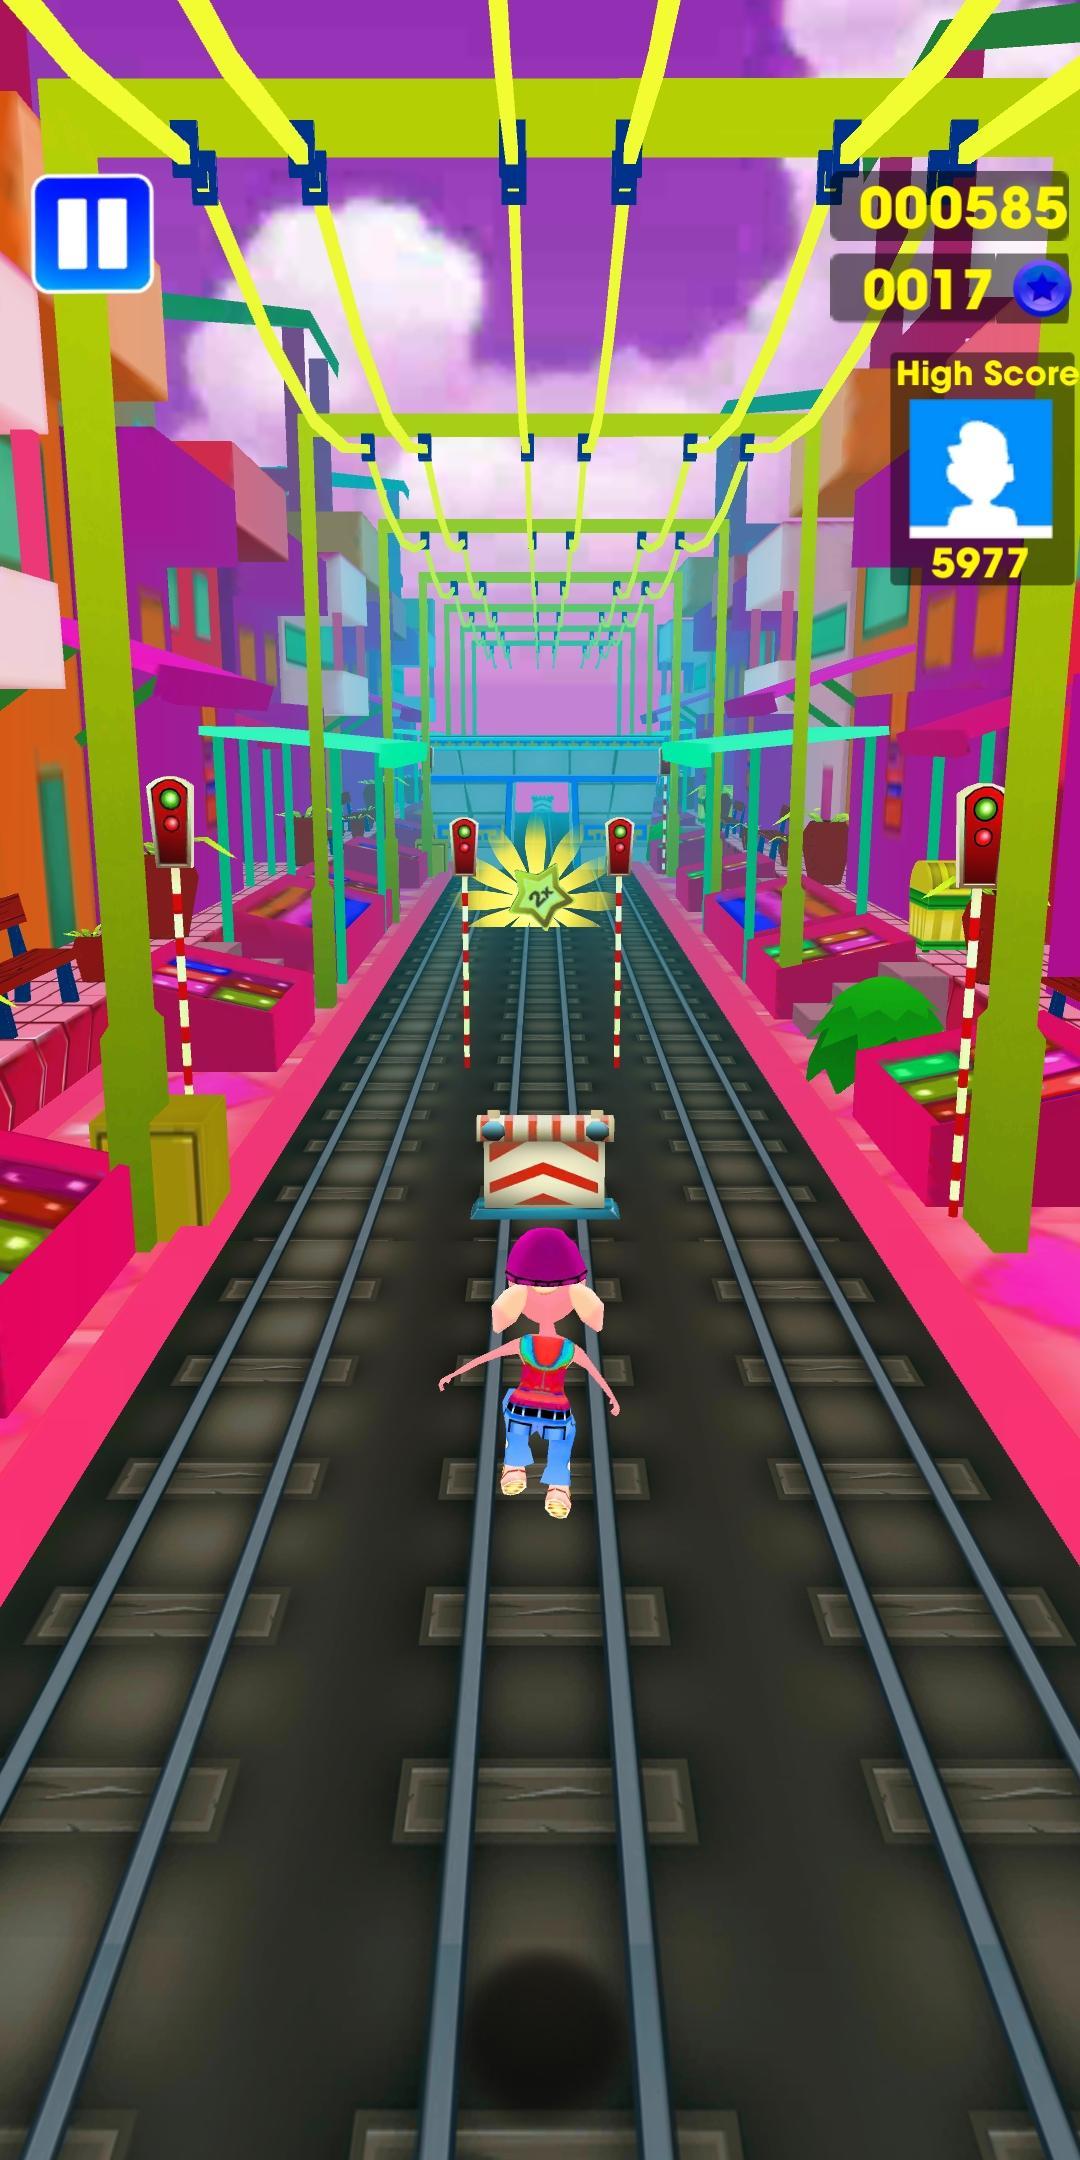 Super Subway Surf 3D 2018 Apk Download for Android- Latest version